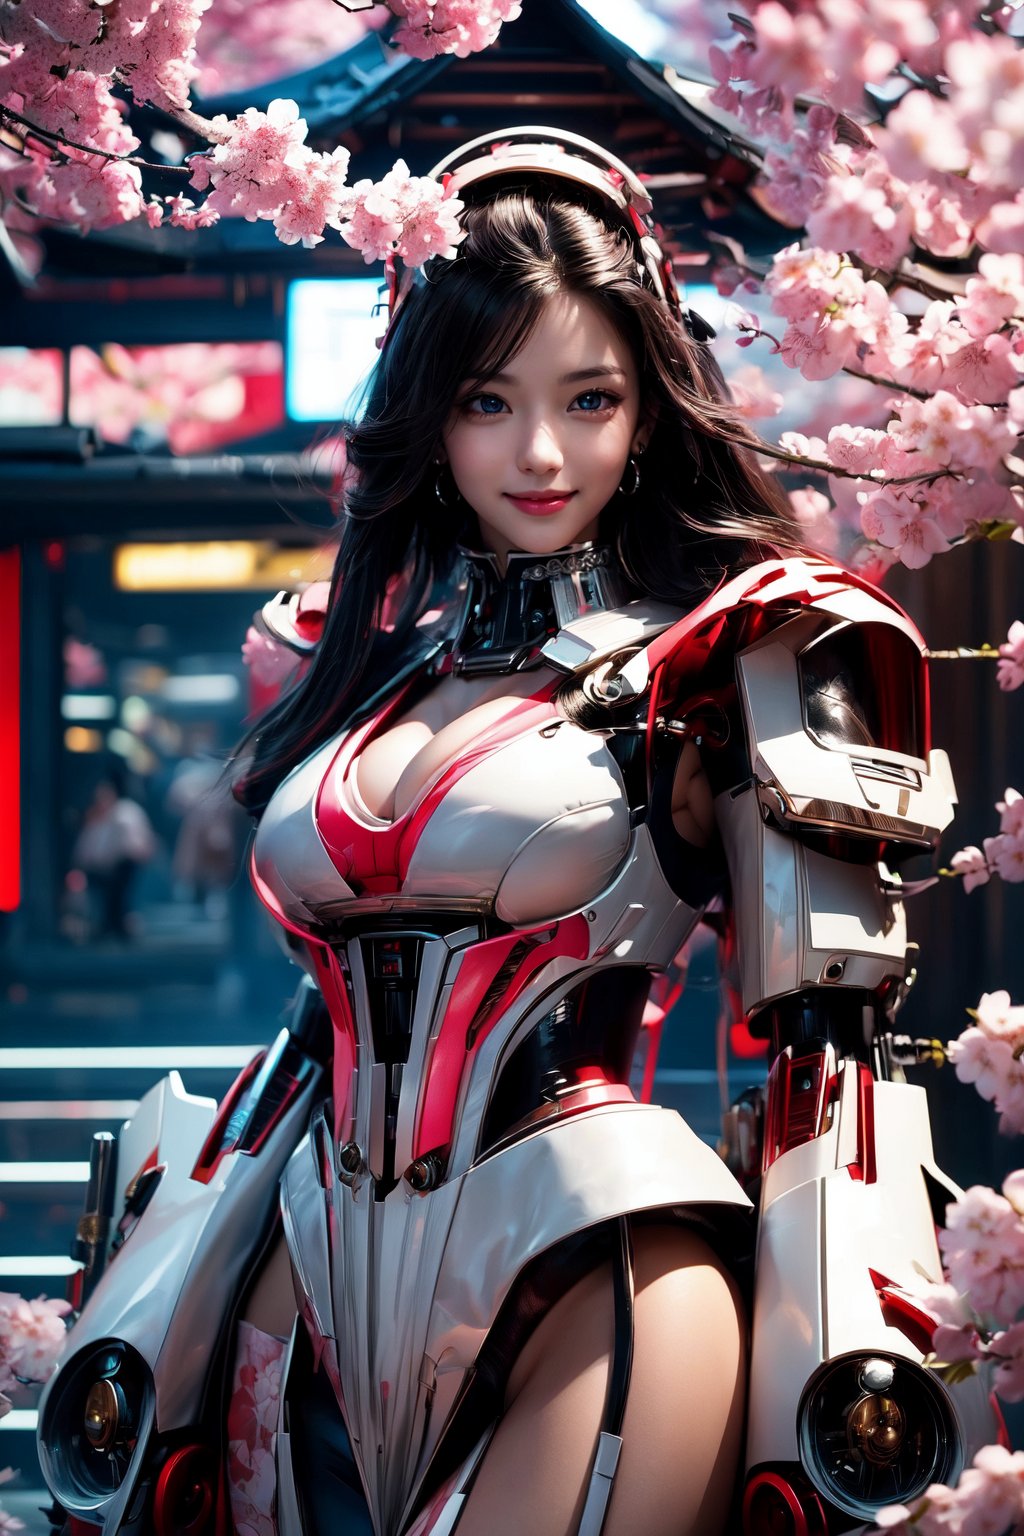 Masterpiece, High quality, 64K, Unity 64K Wallpaper, HDR, Best Quality, RAW, Super Fine Photography, Super High Resolution, Super Detailed, 
Beautiful and Aesthetic, Stunningly beautiful, Perfect proportions, 
1girl, Solo, White skin, Detailed skin, Realistic skin details, 
Futuristic Mecha, Arms Mecha, Dynamic pose, Battle stance, Swaying hair, by FuturEvoLab, 
Dark City Night, Cyberpunk city, Cyberpunk architecture, Future architecture, Fine architecture, Accurate architectural structure, Detailed complex busy background, Gorgeous, Cherry blossoms,
Sharp focus, Perfect facial features, Pure and pretty, Perfect eyes, Lively eyes, Elegant face, Delicate face, Exquisite face, Pink Mecha, Oiran, 